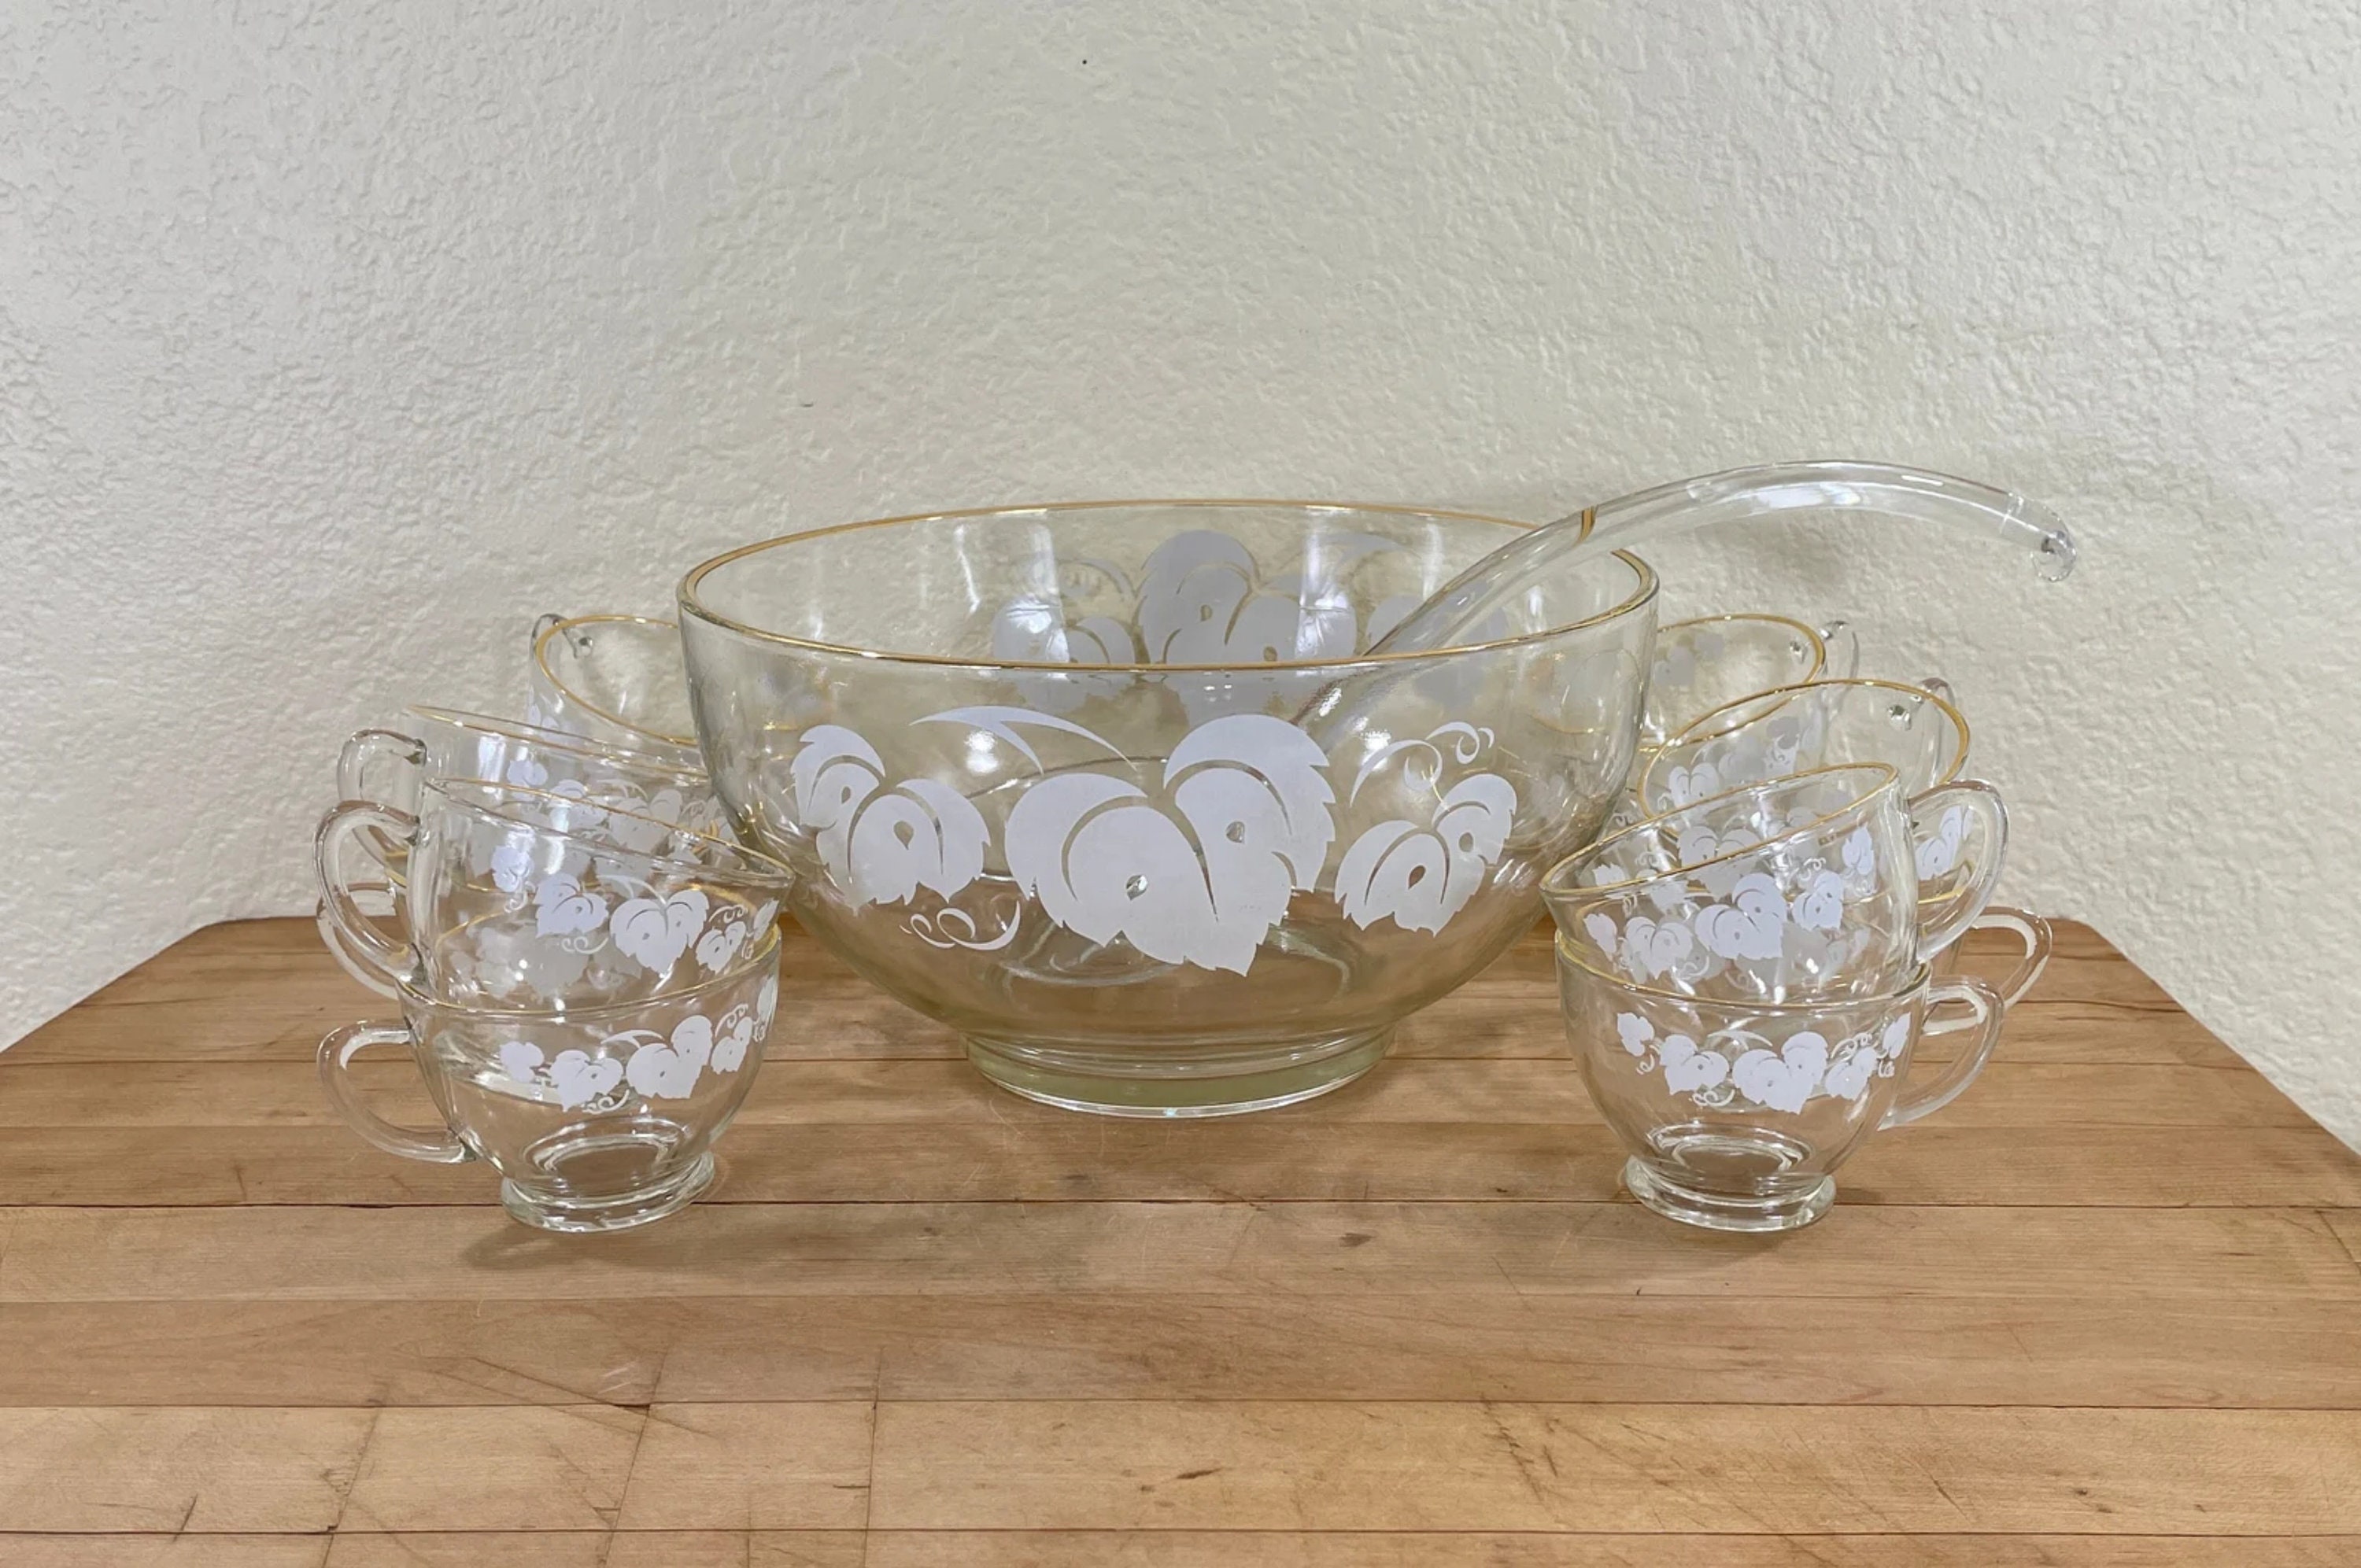 L.E. Smith “Pineapple” Punch Large Bowl Set with Glass Ladle and